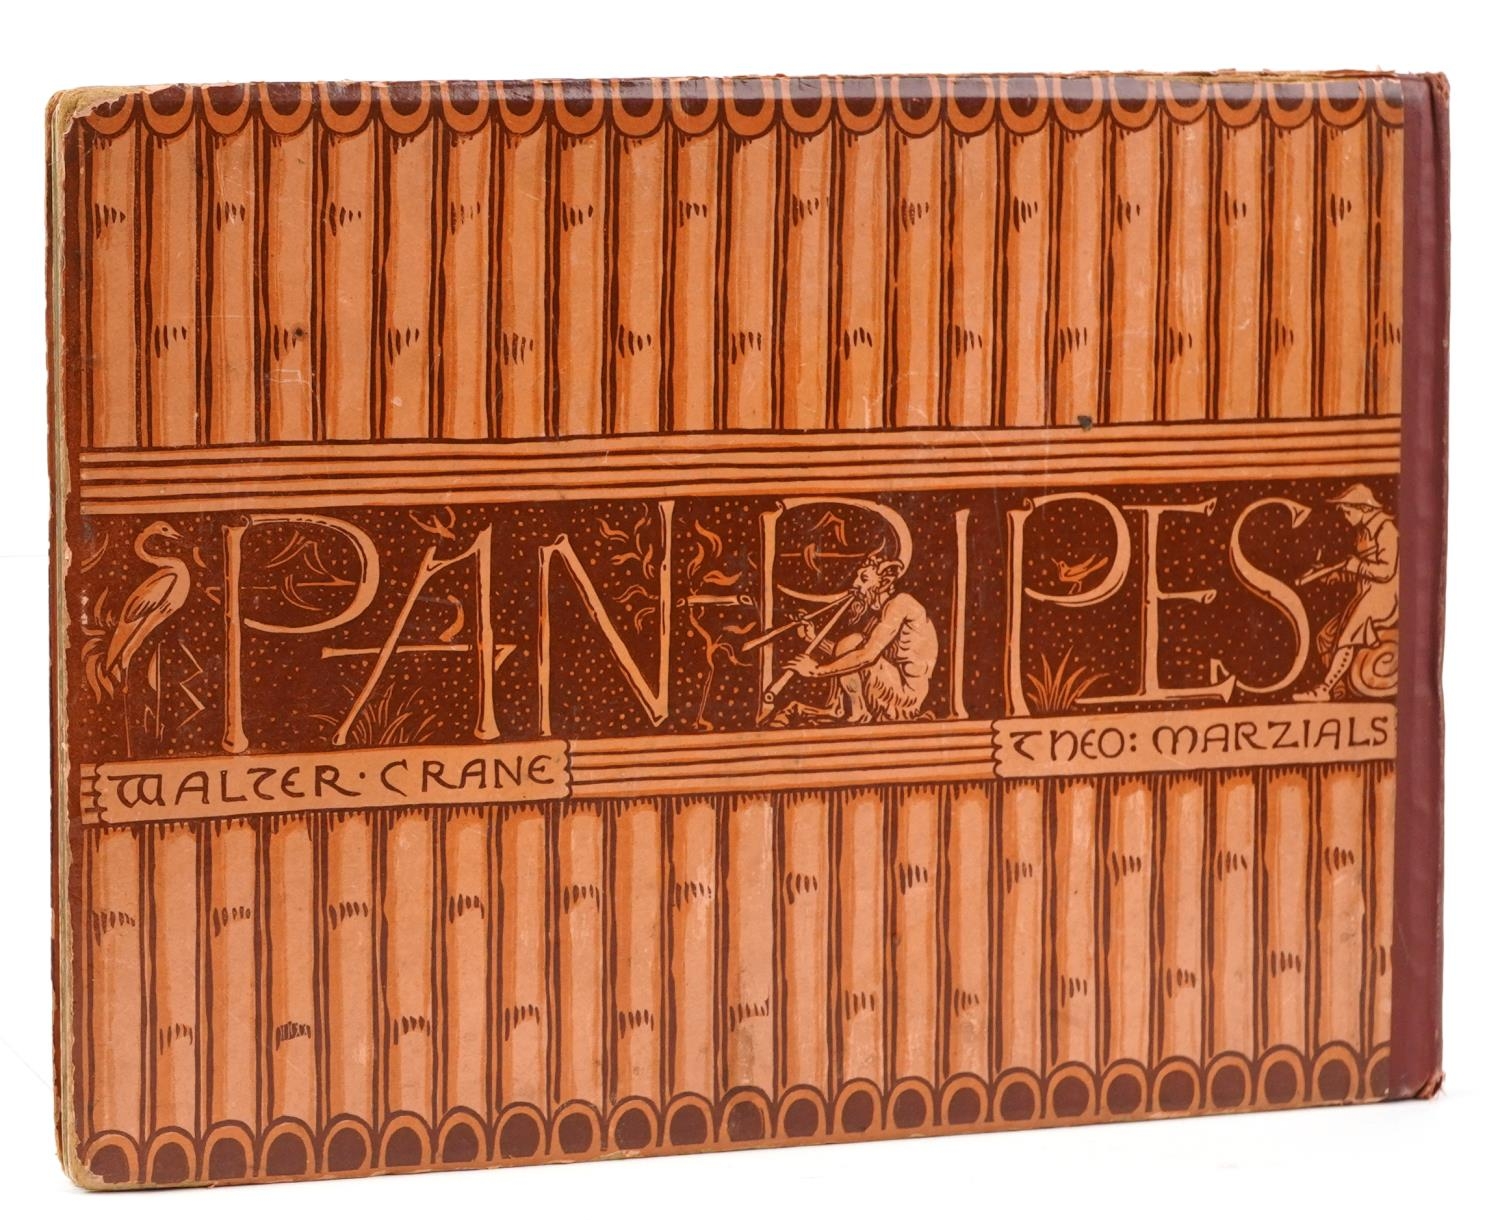 Pan Pipes, hardback book by Walter Crane published London George Routledge & Sons 1883 - Image 4 of 4